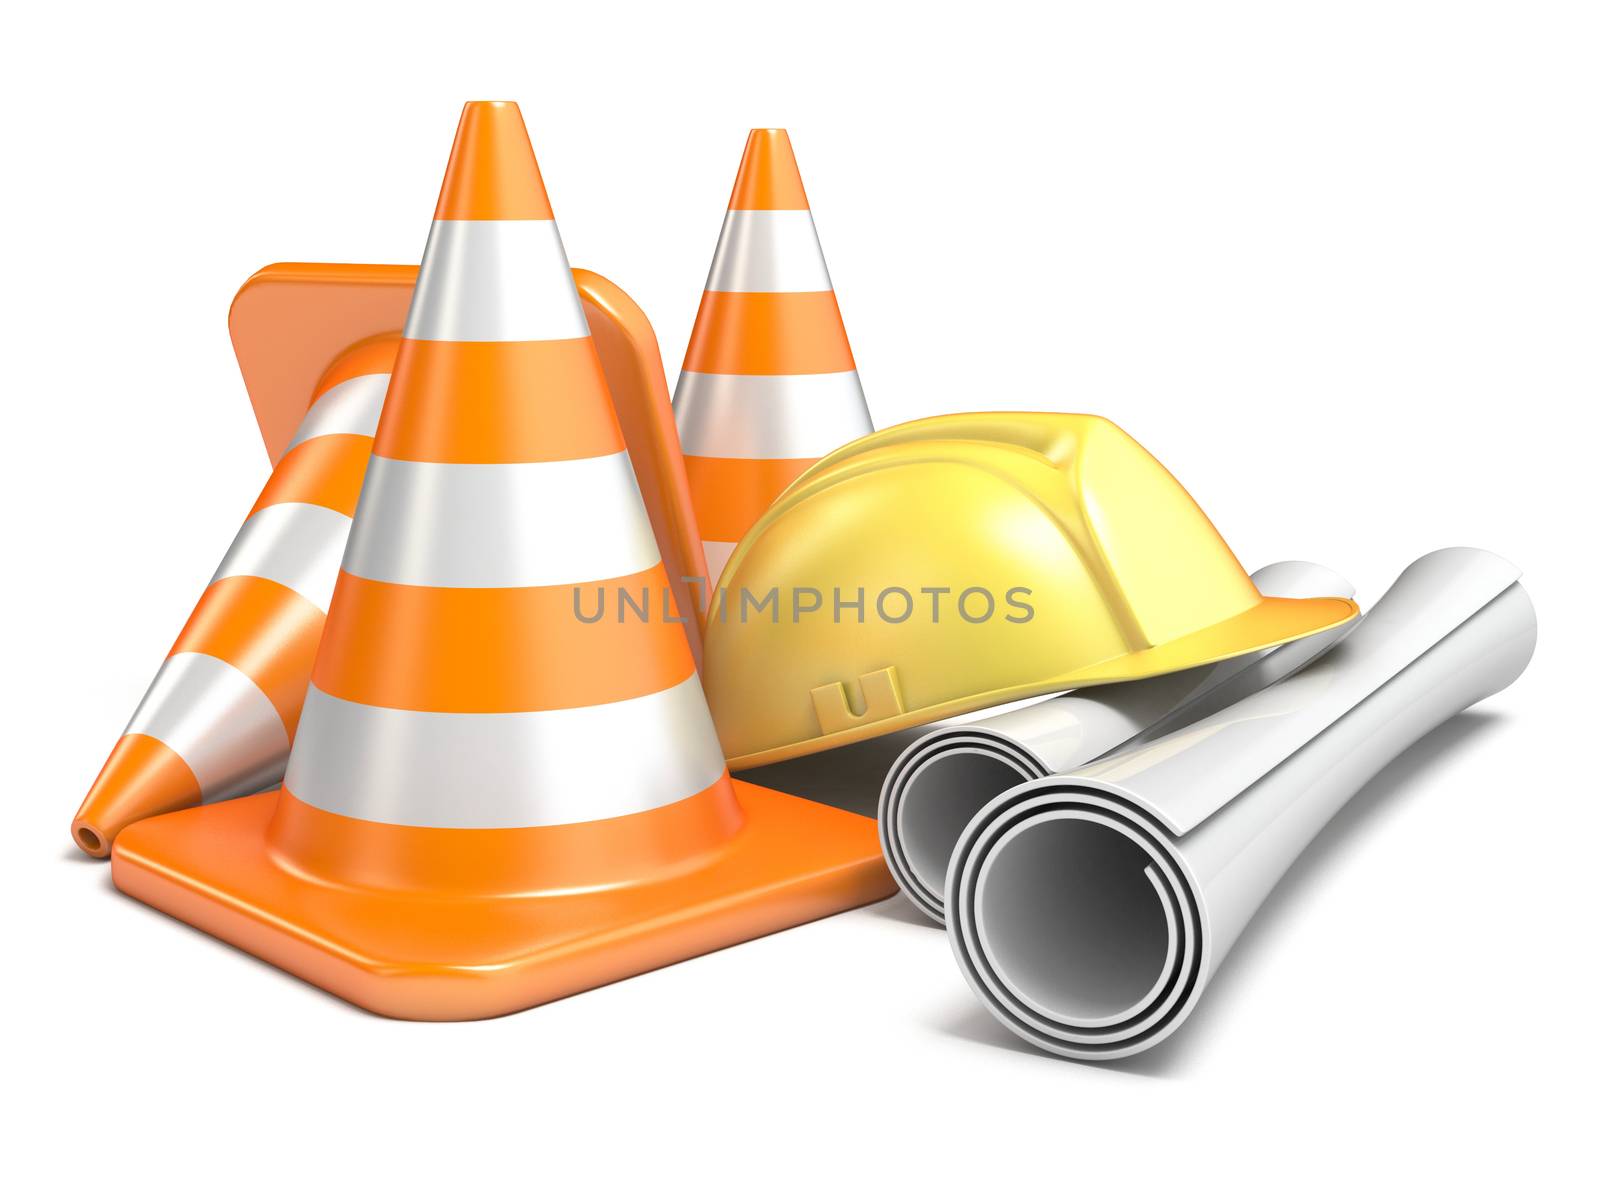 Under construction concept 3D render illustration isolated on white background